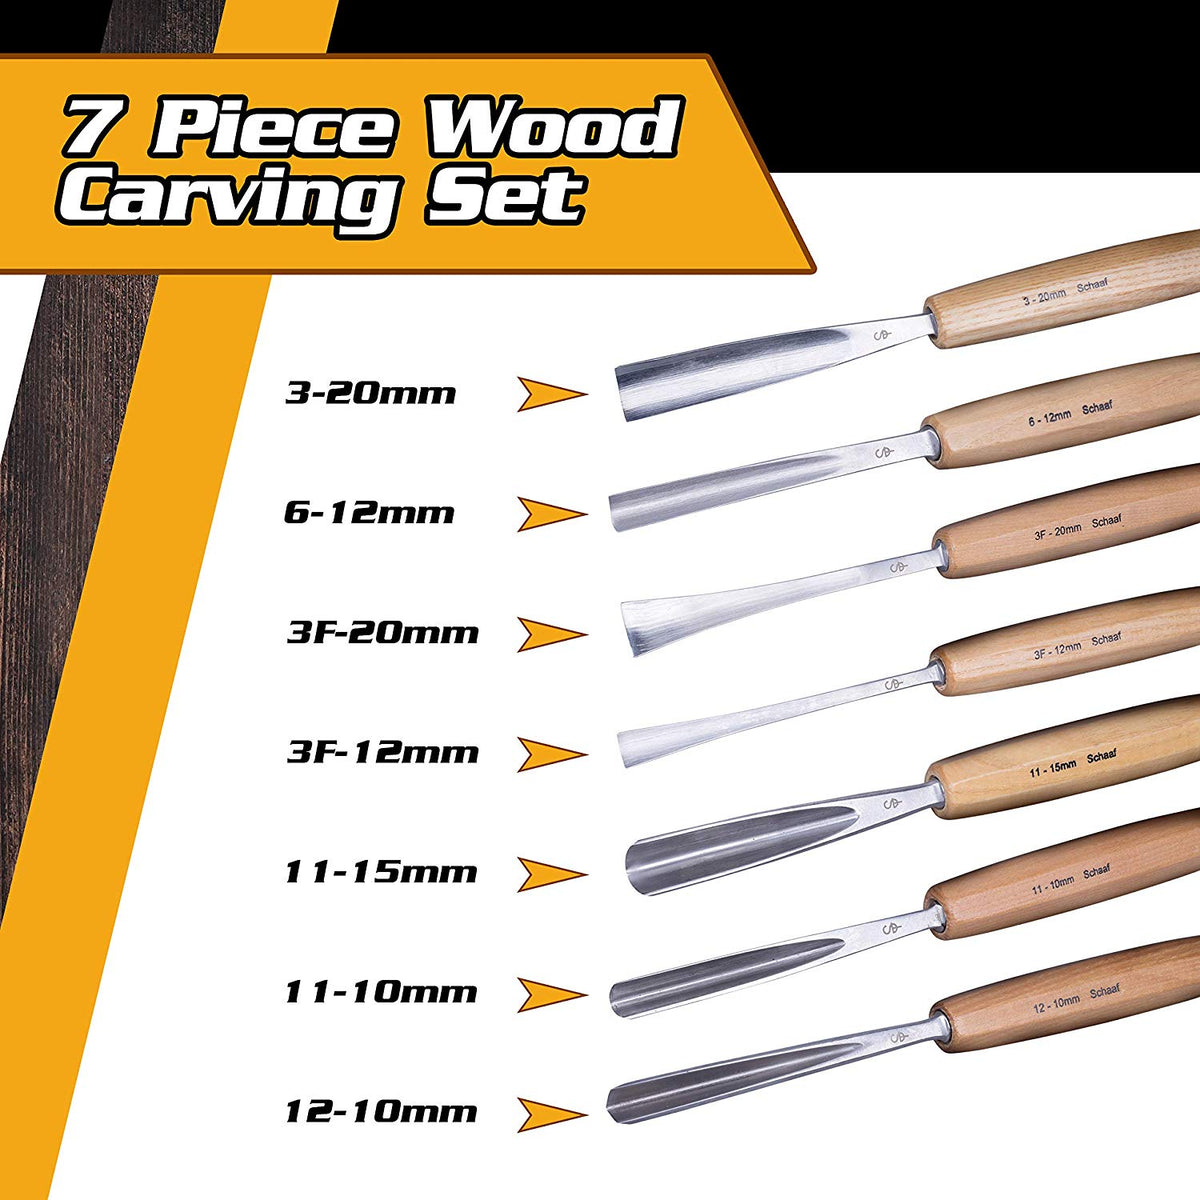 Schaaf Full Size Wood Carving Tools Set of 12 eBook Included 100 Guarantee  for sale online